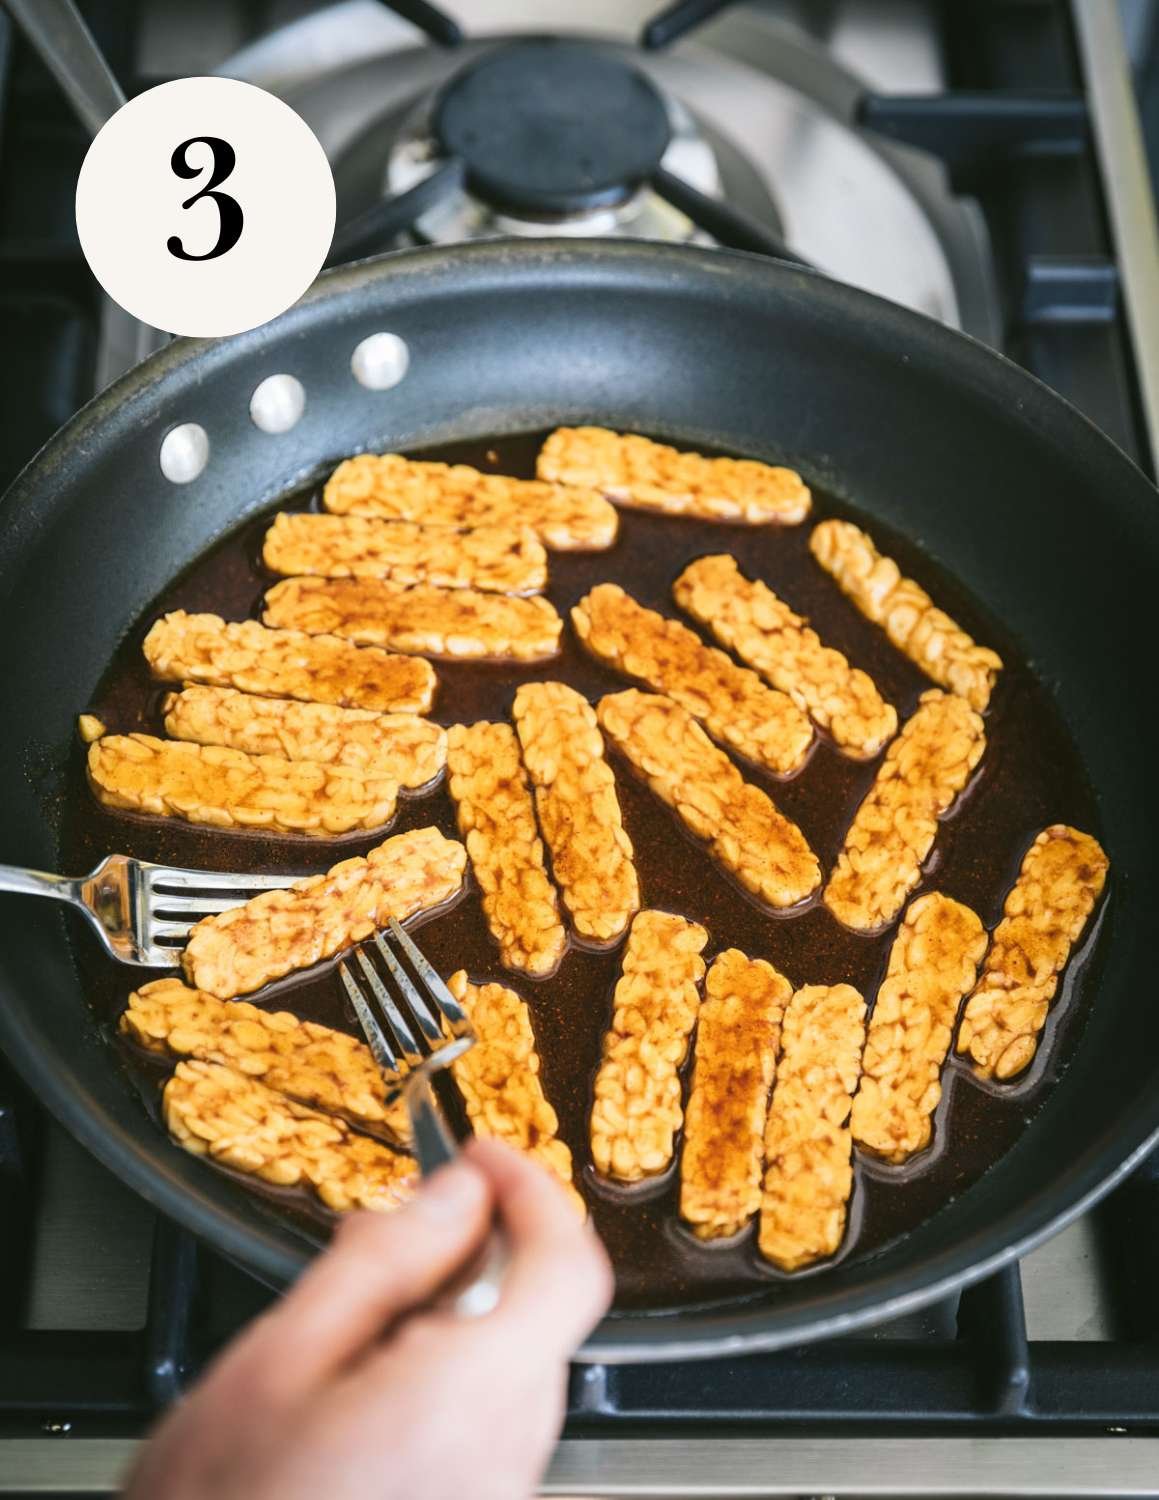 Tempeh slices in bacon sauce in a pan.